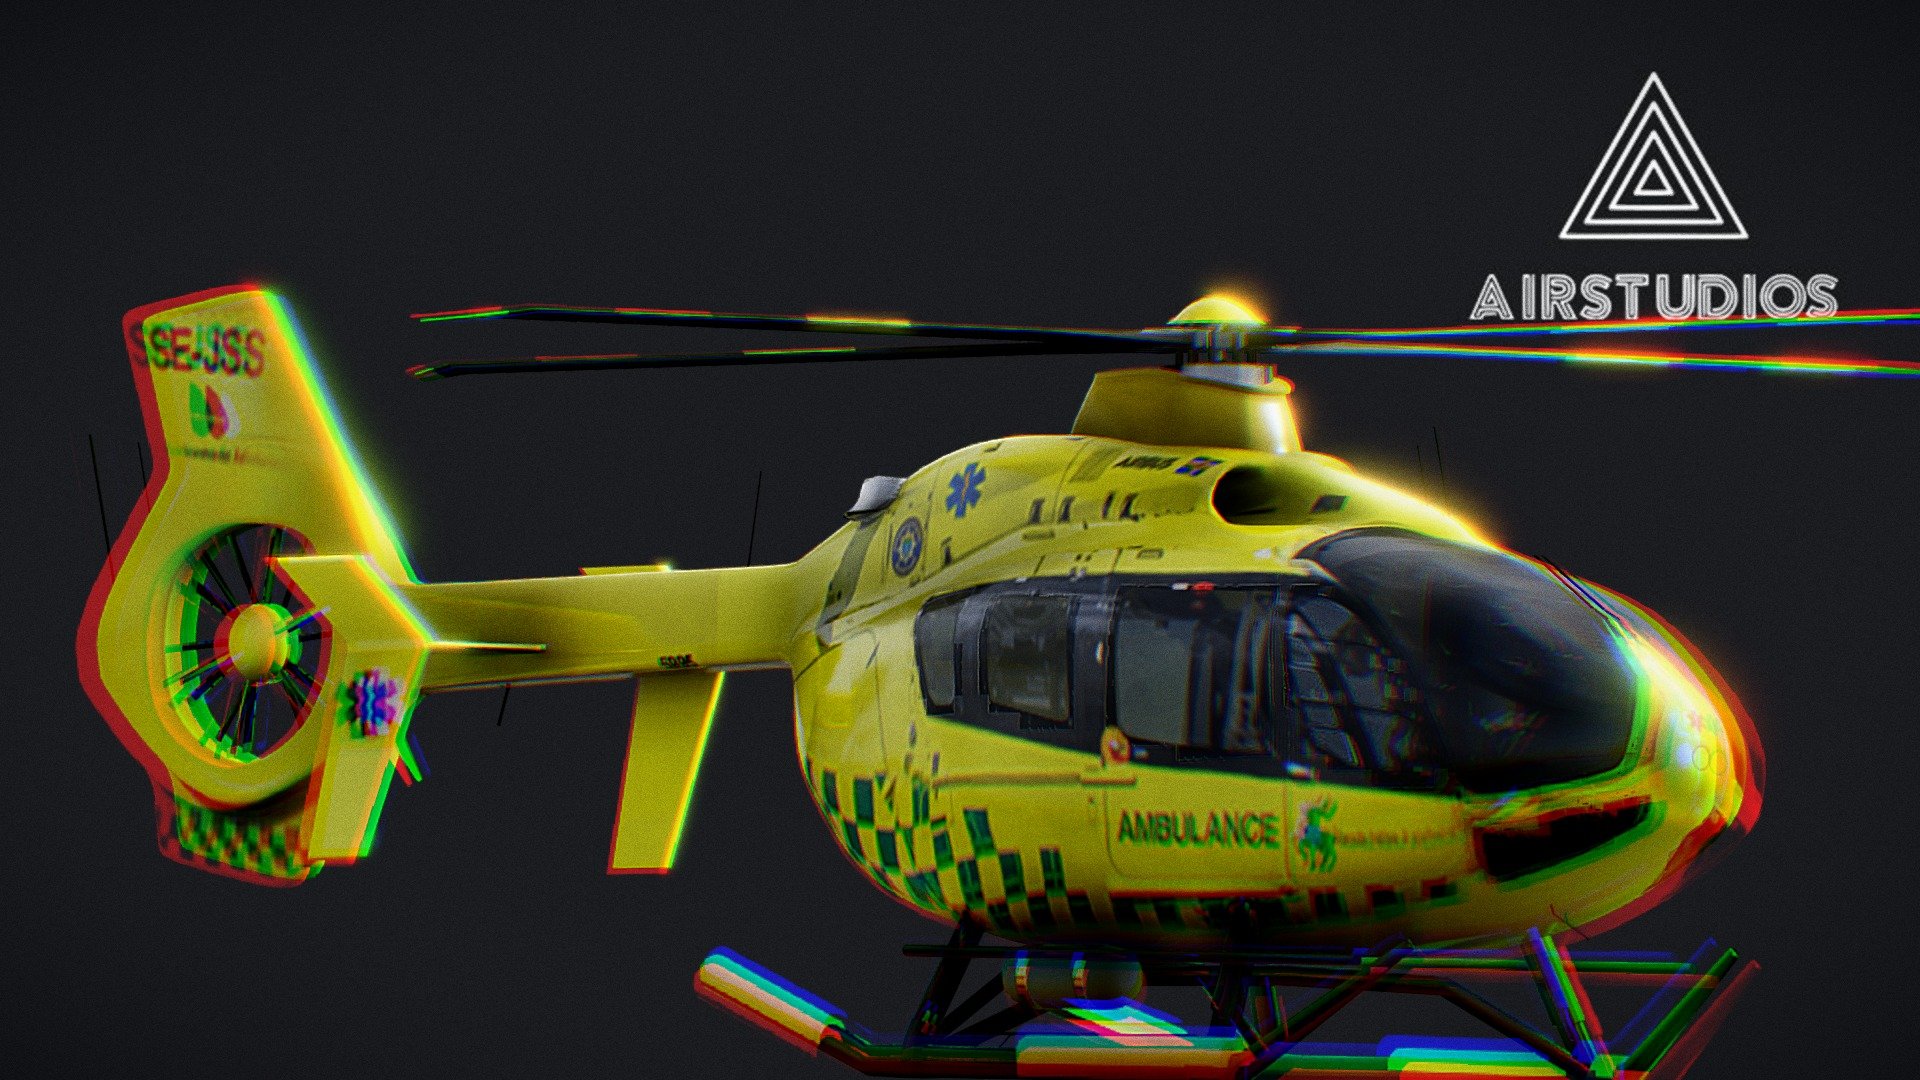 Ambulance Helicopter Airbus H135 (Swedish) - Ambulance Helicopter Airbus H135 - Buy Royalty Free 3D model by AirStudios (@sebbe613) 3d model